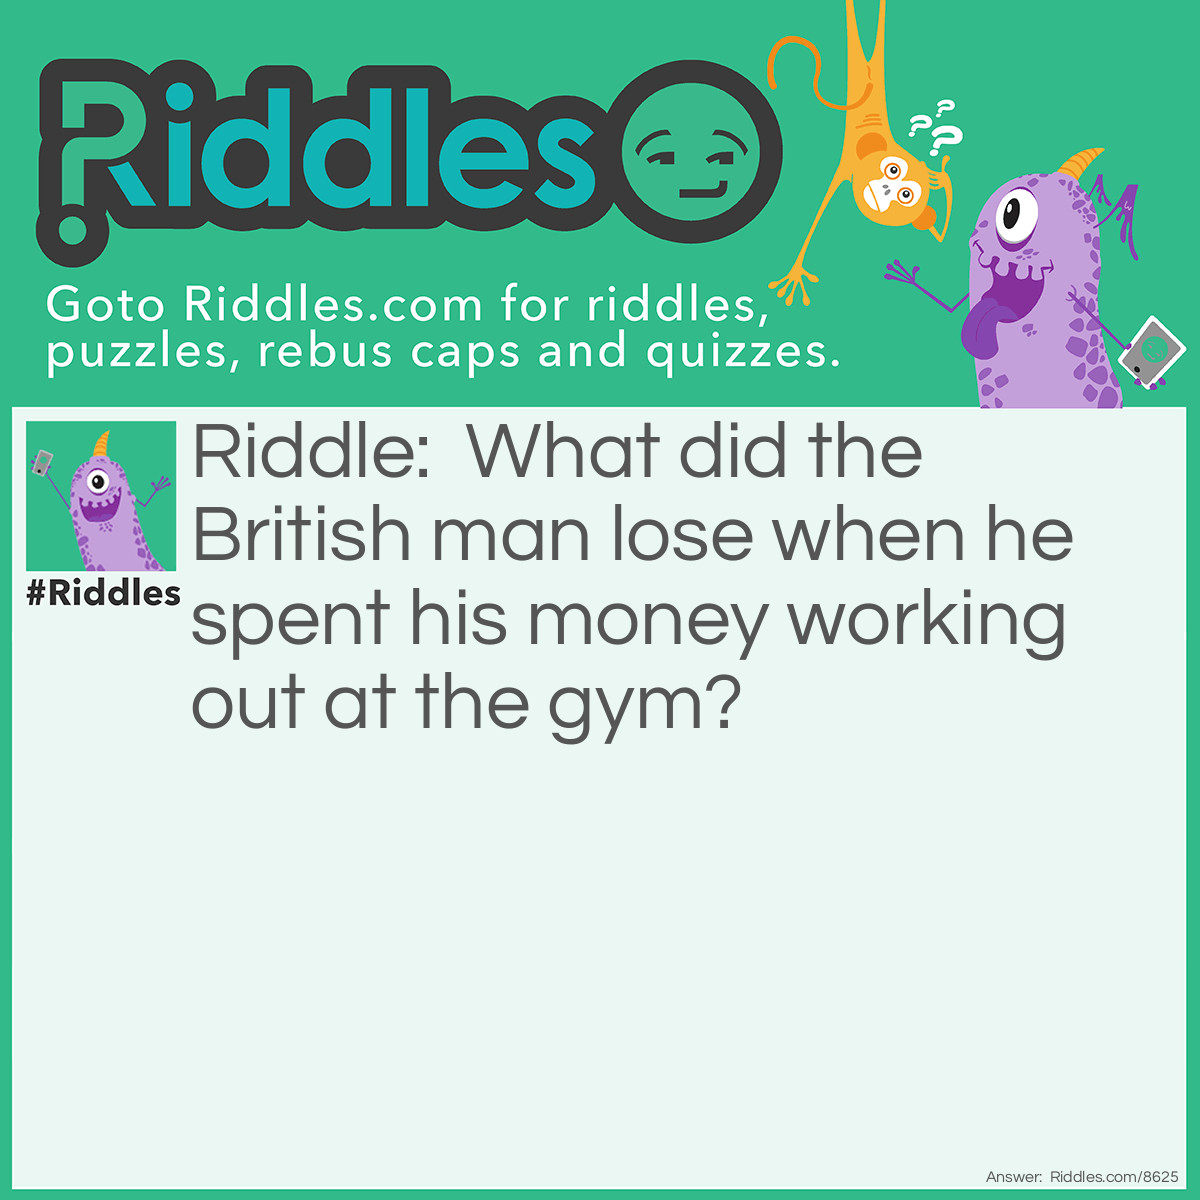 Riddle: What did the British man lose when he spent his money working out at the gym? Answer: Pounds.